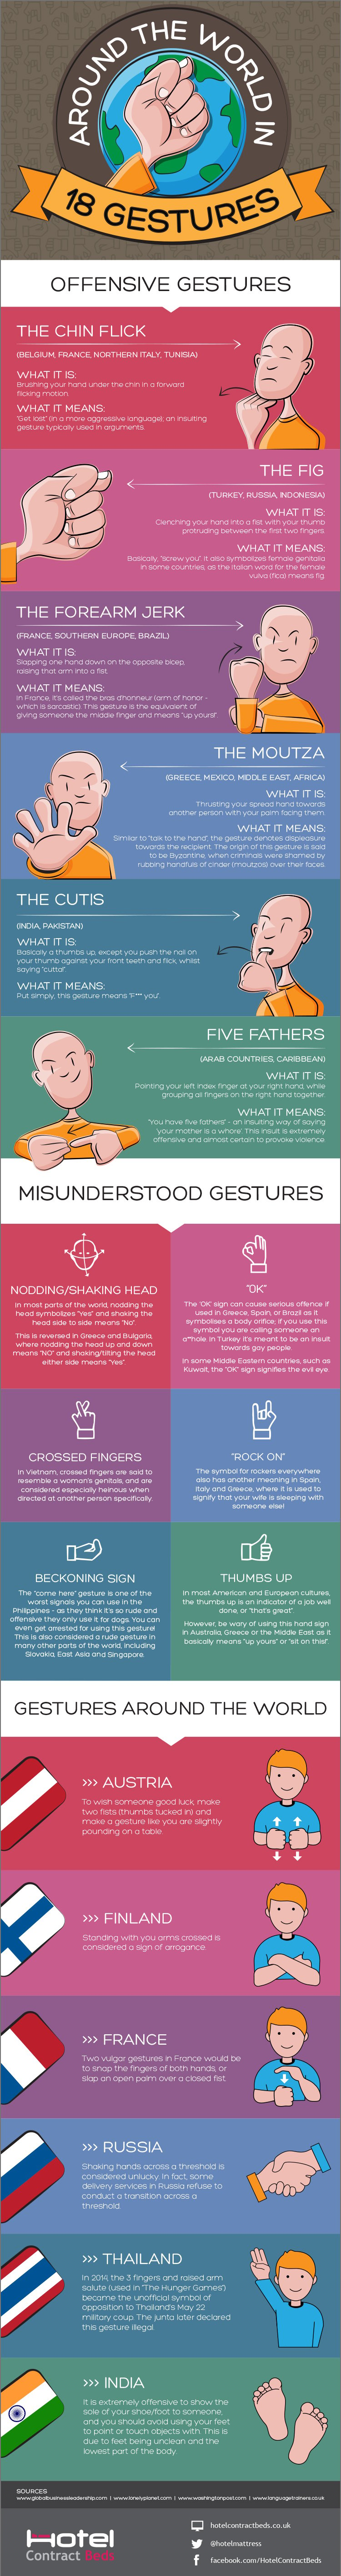 18 Gestures That Can Cause Offense Around the World